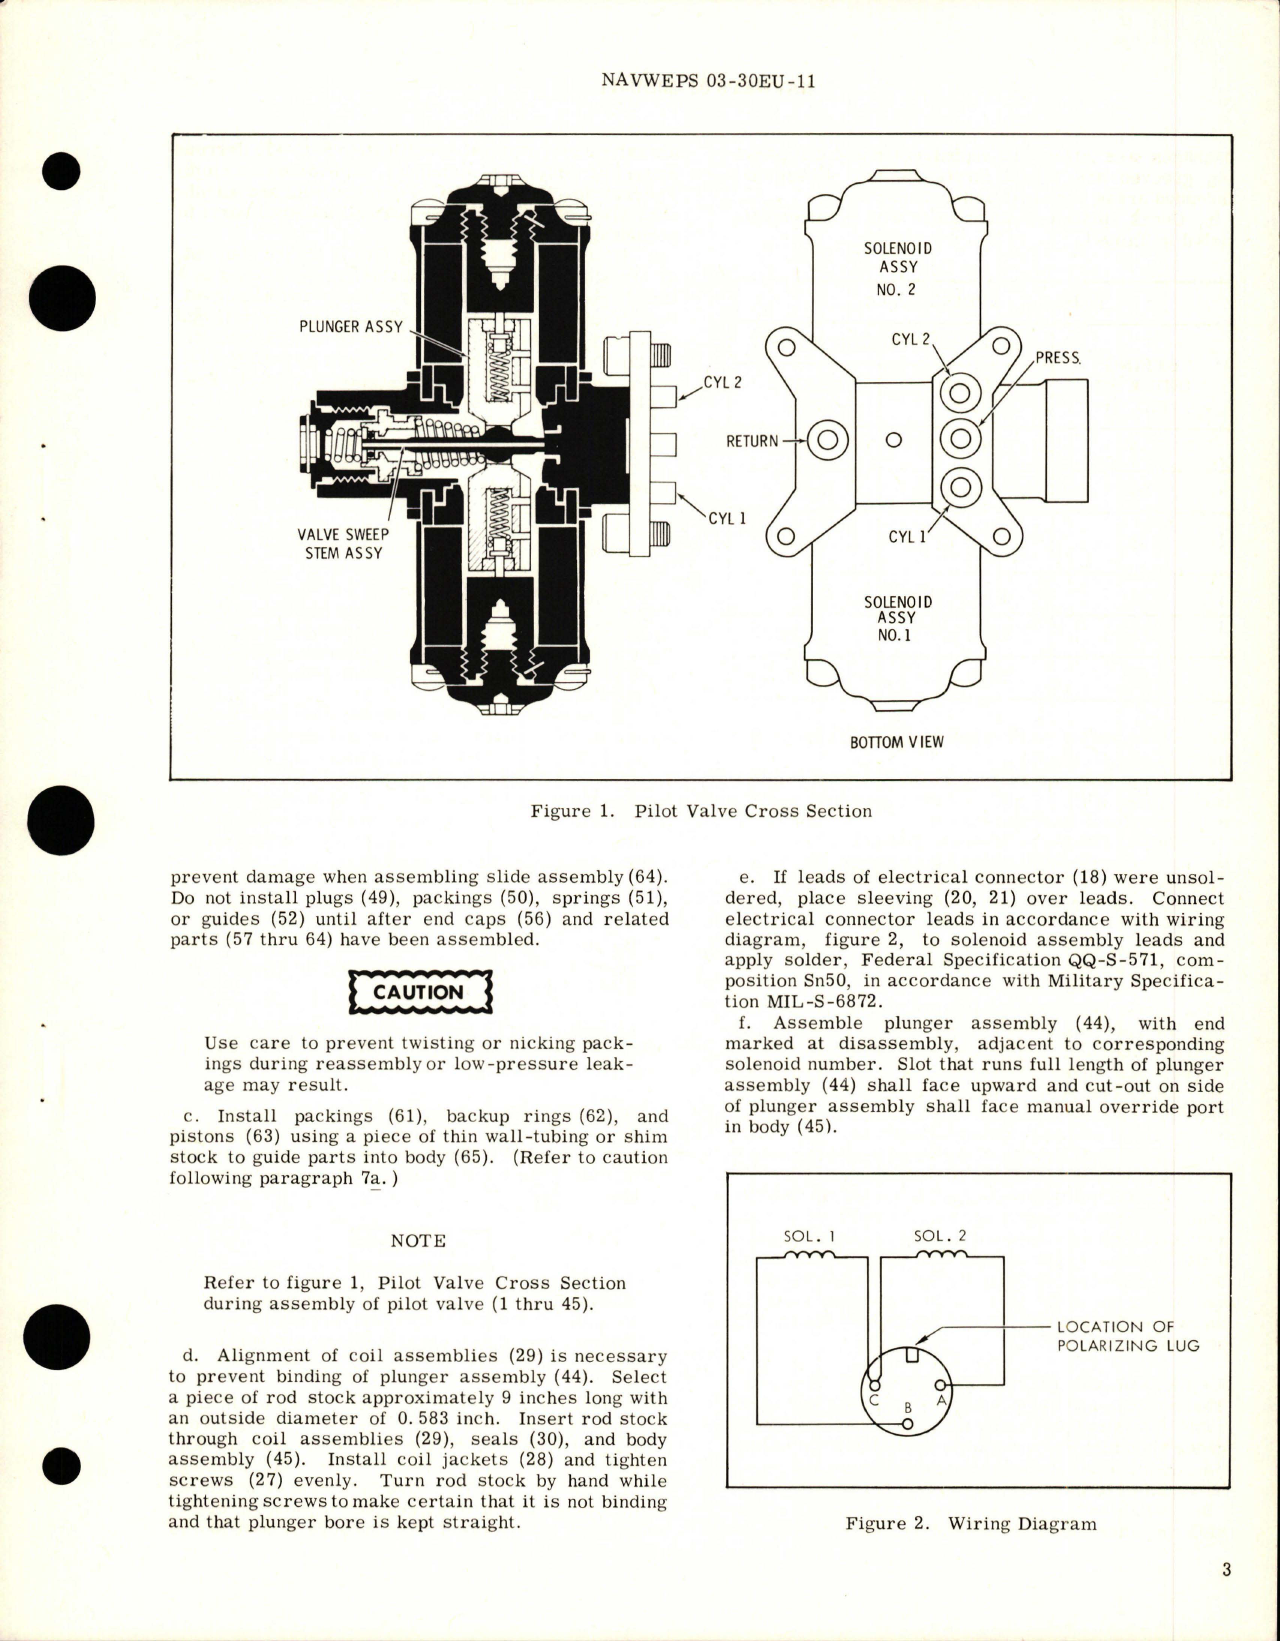 Sample page 5 from AirCorps Library document: Overhaul Instructions w Parts Breakdiown for Pilot Operated 4-Way 3-Position Selector Valve - Part AV14B1154C